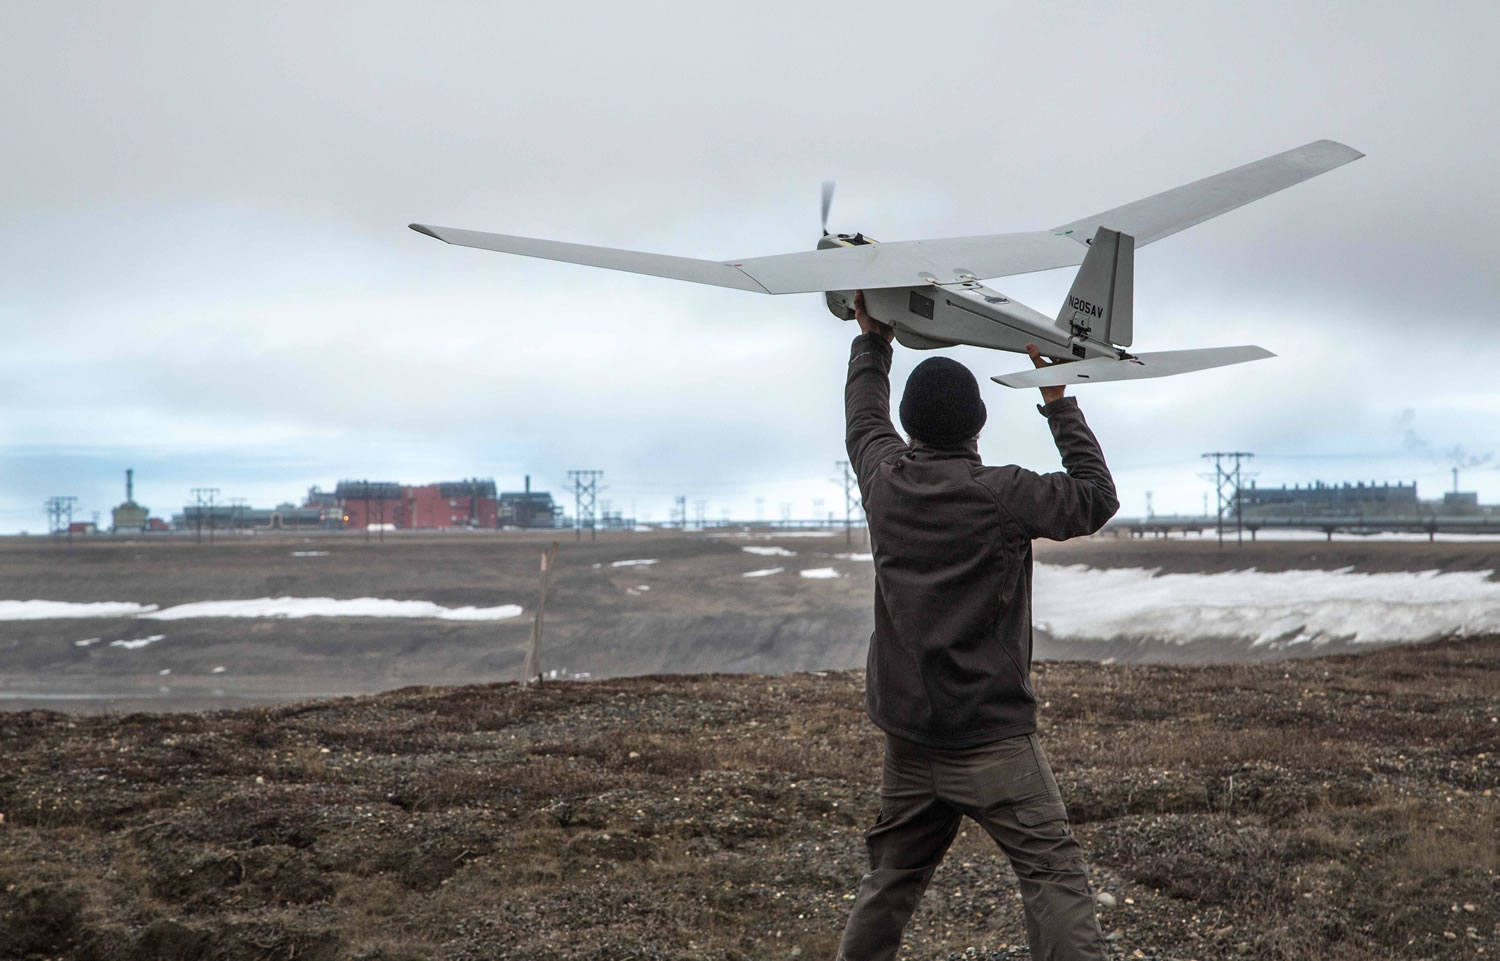 A Puma drone is given a pre-flight checkout in preparation for flights by BP at its Prudhoe Bay, Alaska.